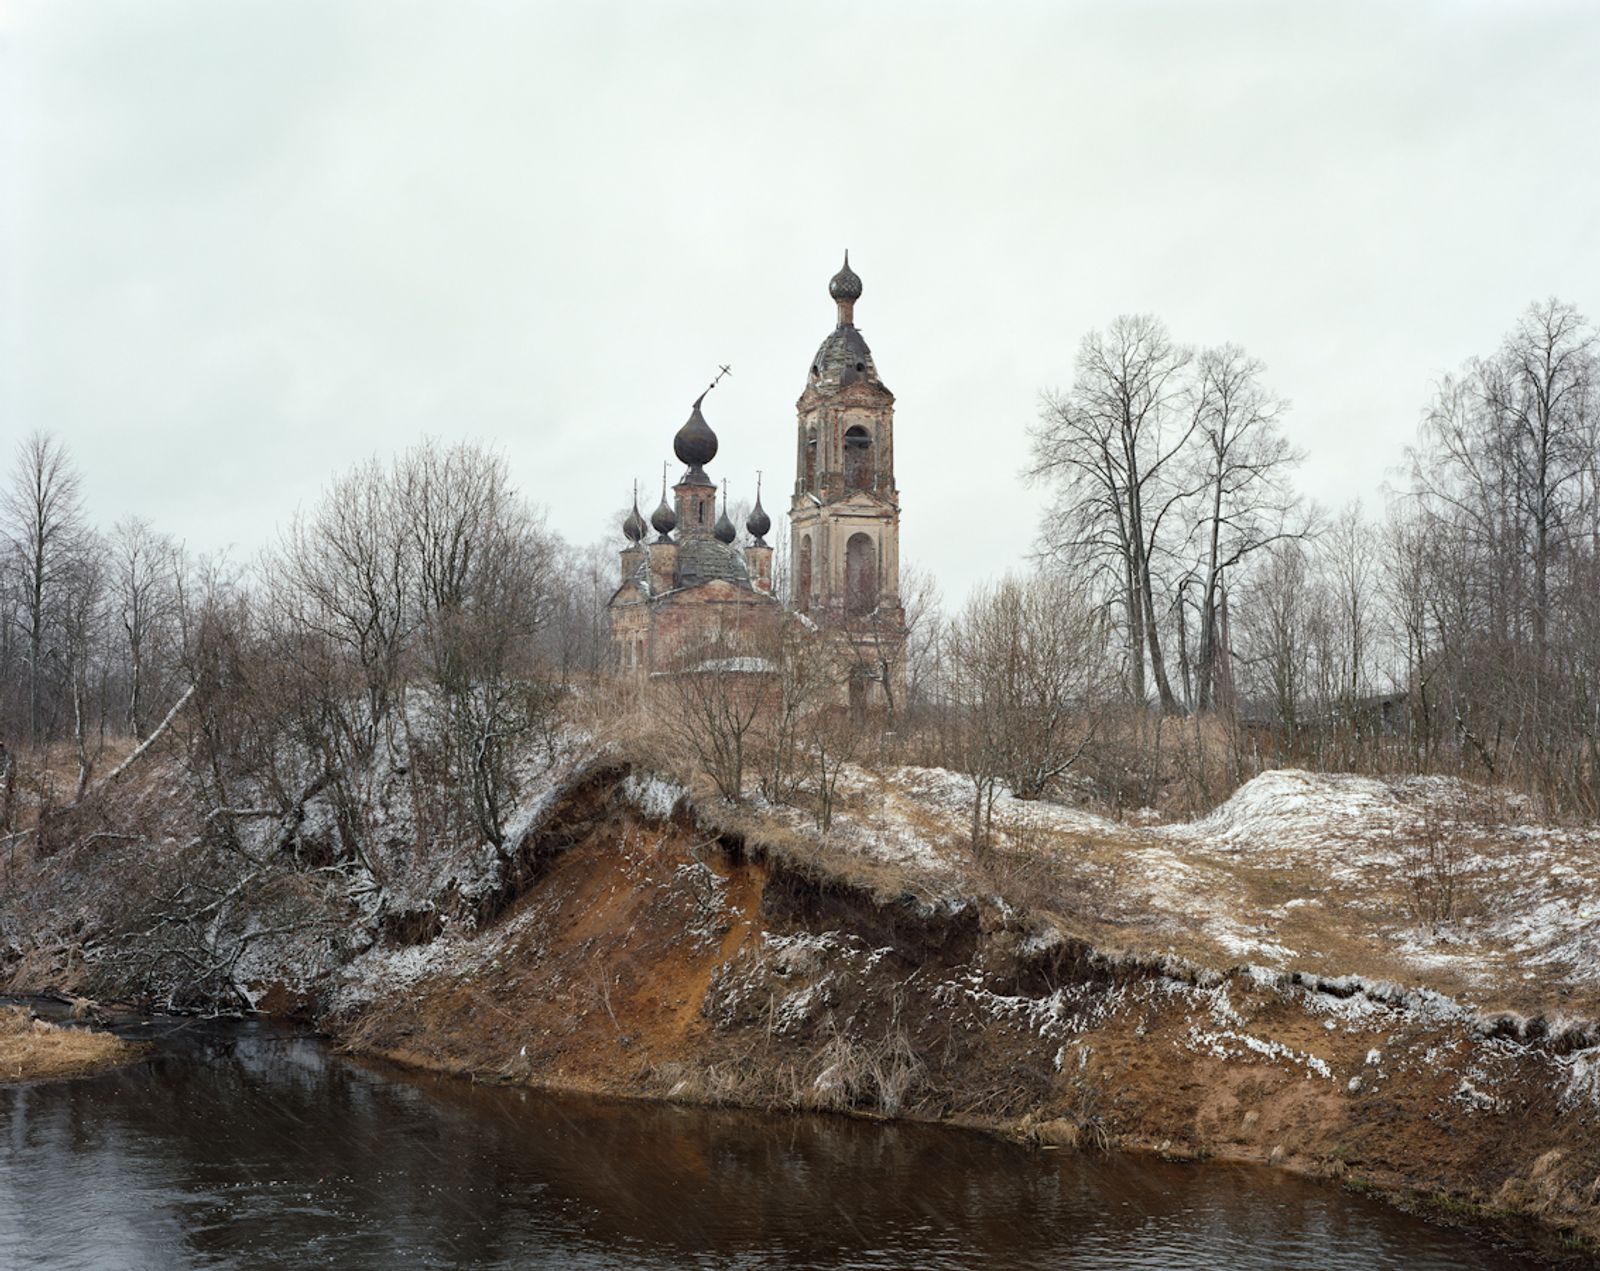 © Petr Antonov - Church of the Meeting of Our Lord in the village of Rezanino. The church was built in 1803 and closed in the 1960s.